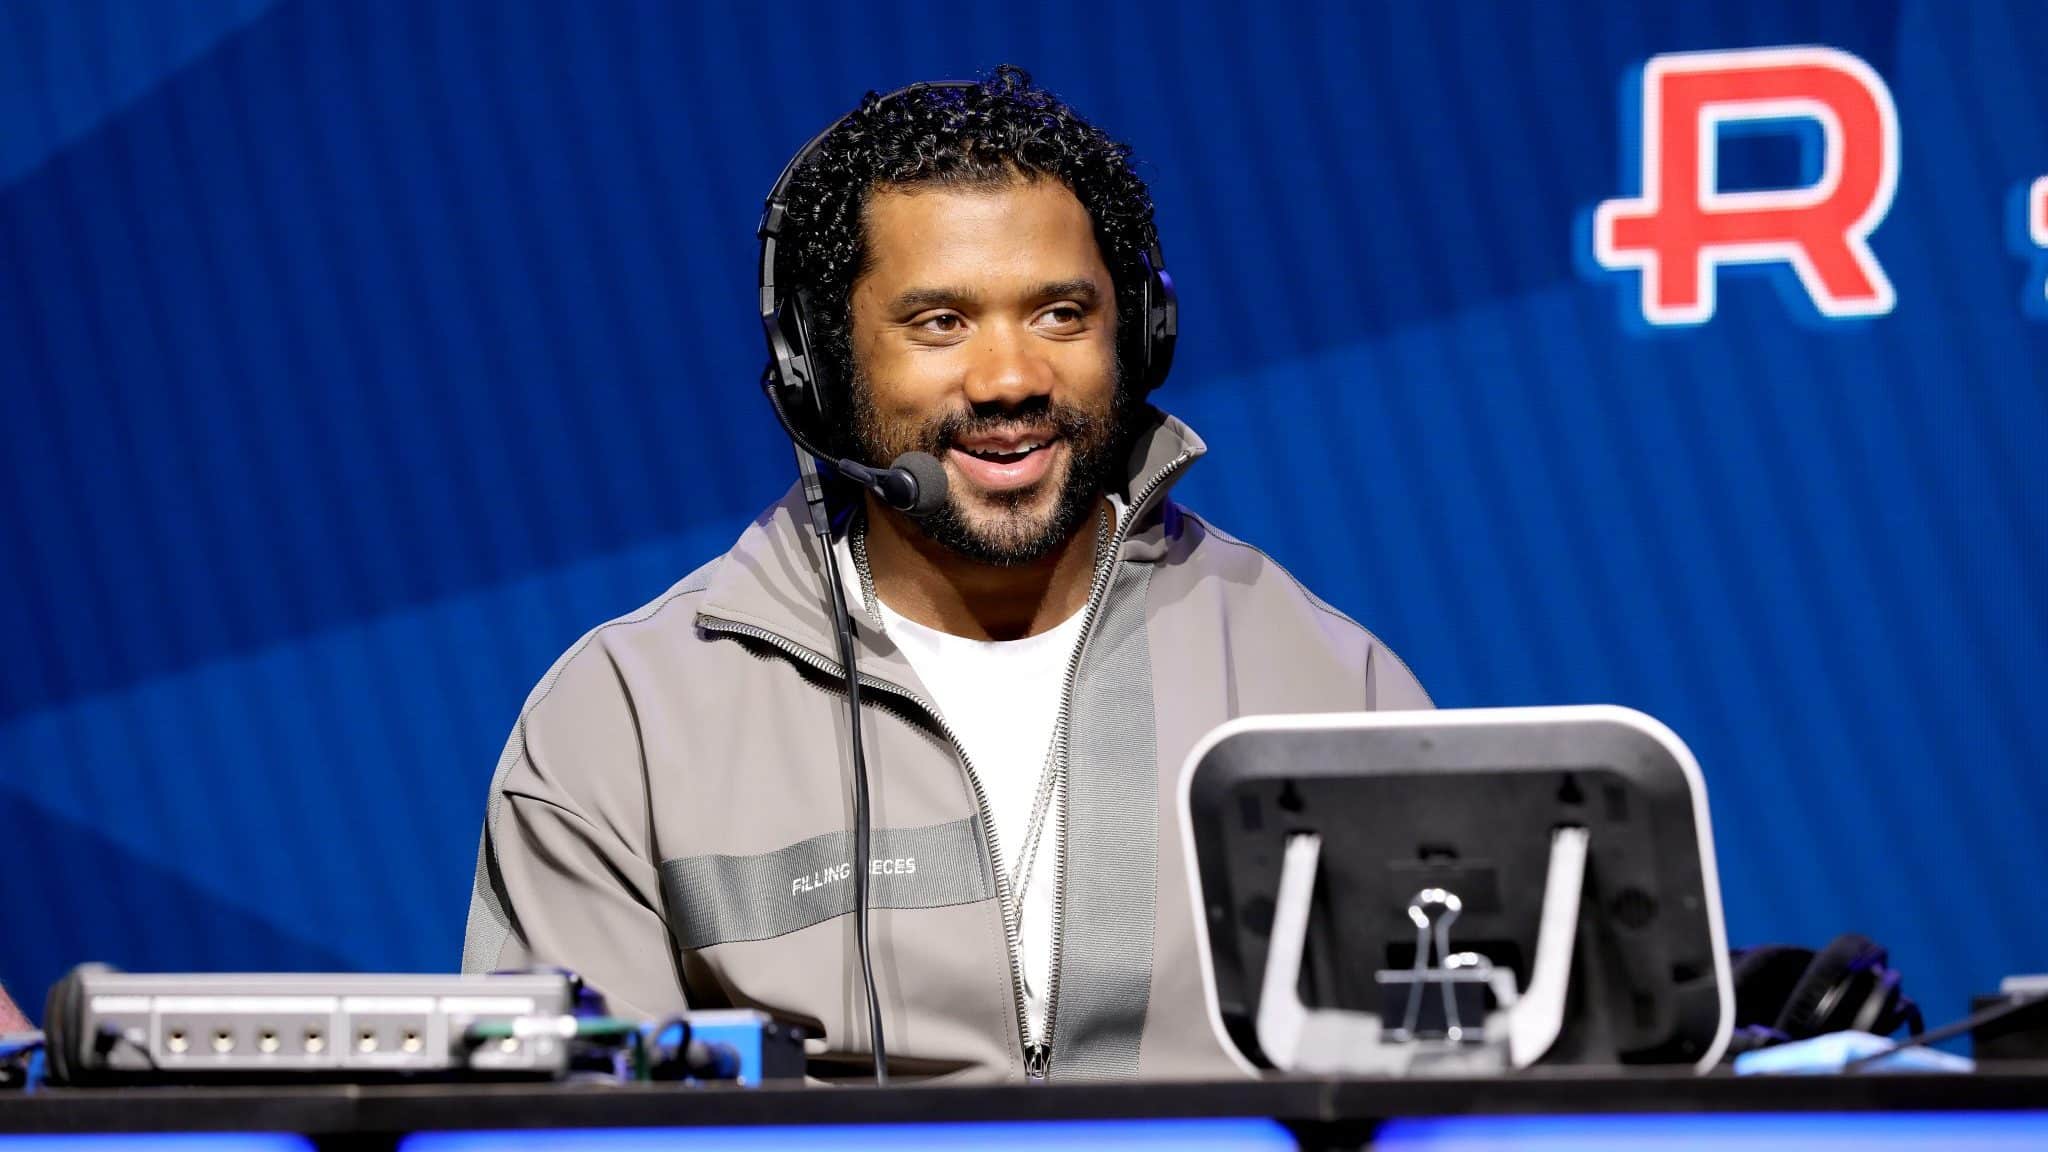 MIAMI, FLORIDA - JANUARY 30: NFL quarterback Russell Wilson of the Seattle Seahawks speaks onstage during day 2 of SiriusXM at Super Bowl LIV on January 30, 2020 in Miami, Florida.